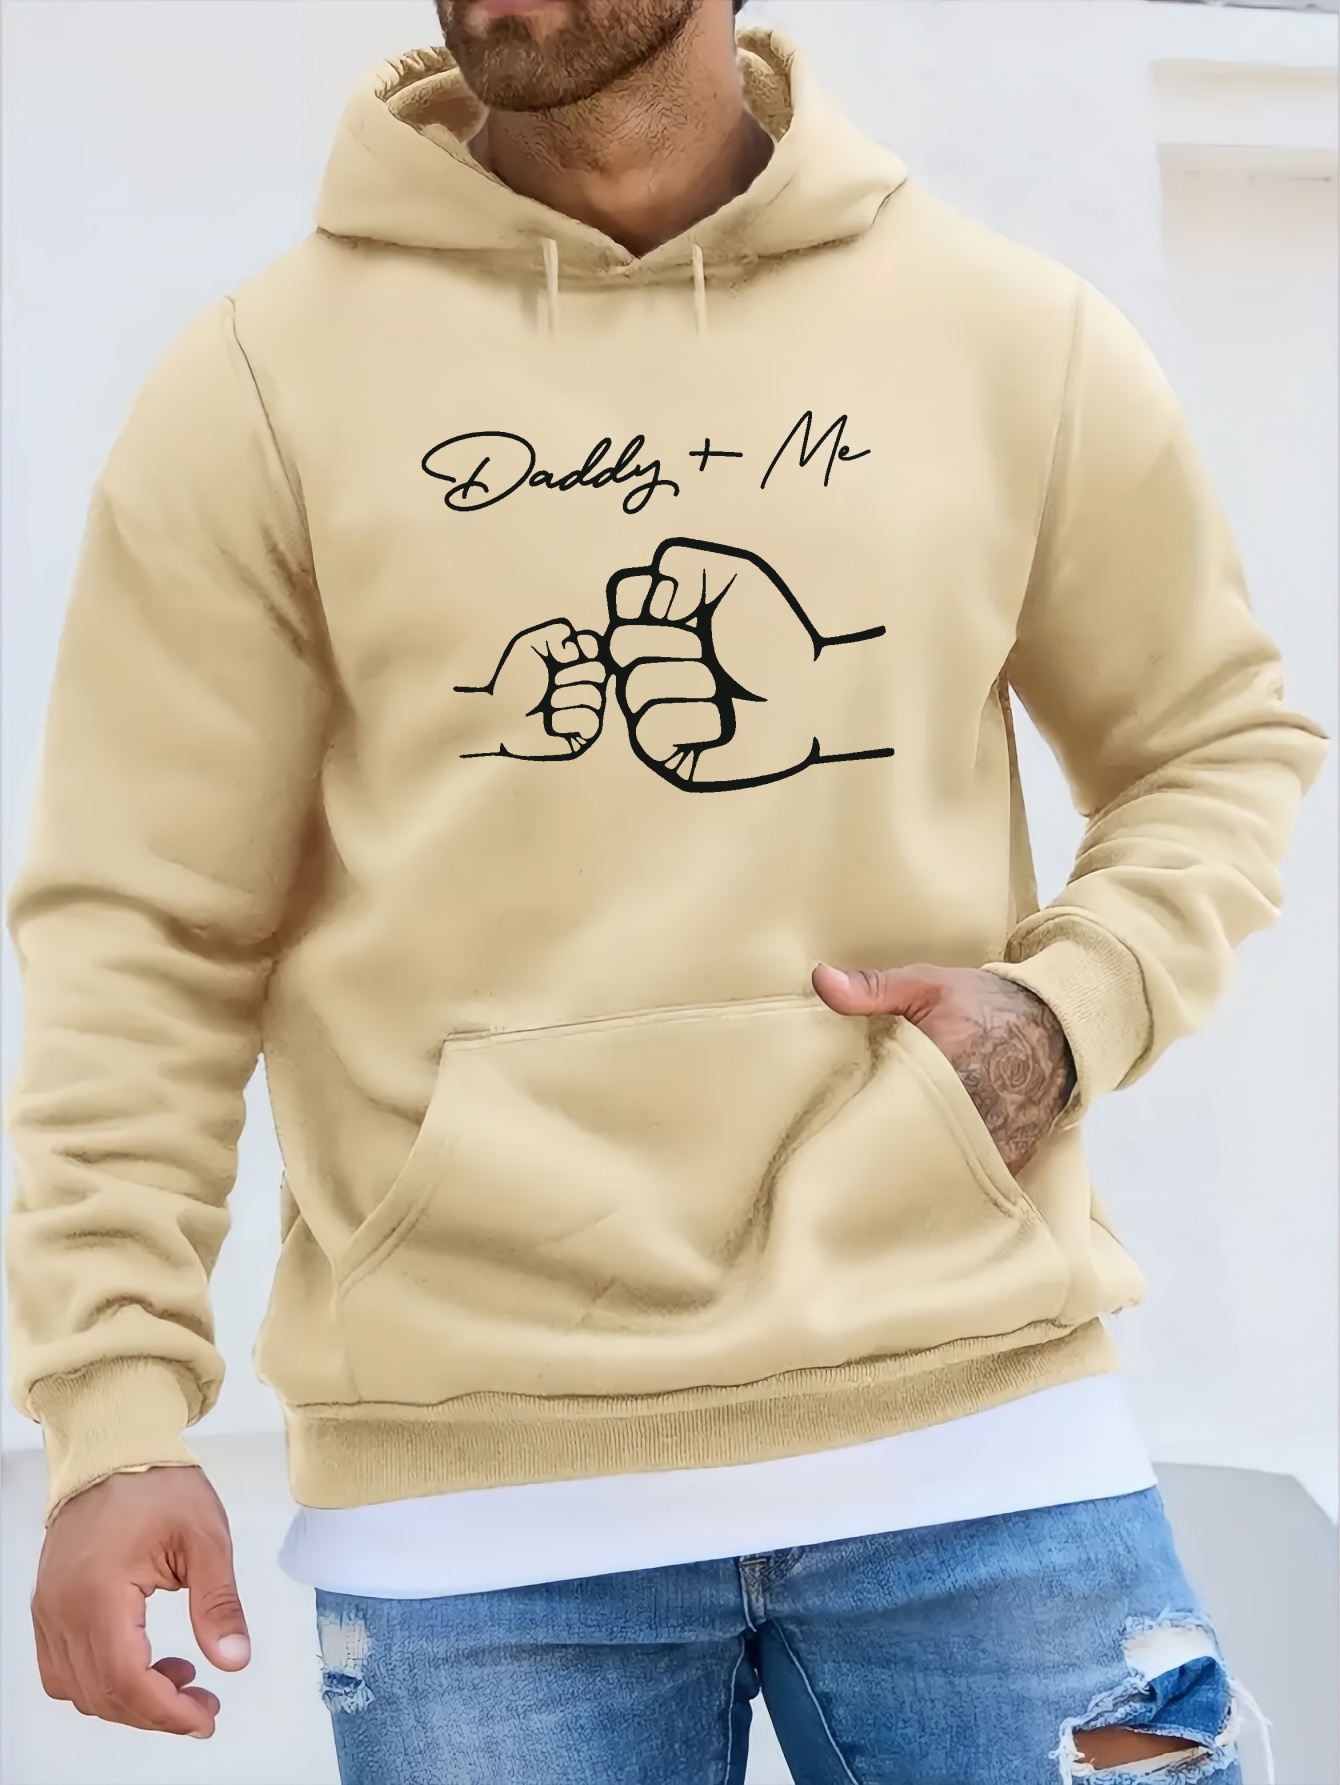 daddy me print kangaroo pocket fleece sweatshirt hoodie pullover fashion street style long sleeve sports tops graphic pullover shirts for men autumn winter gifts details 7